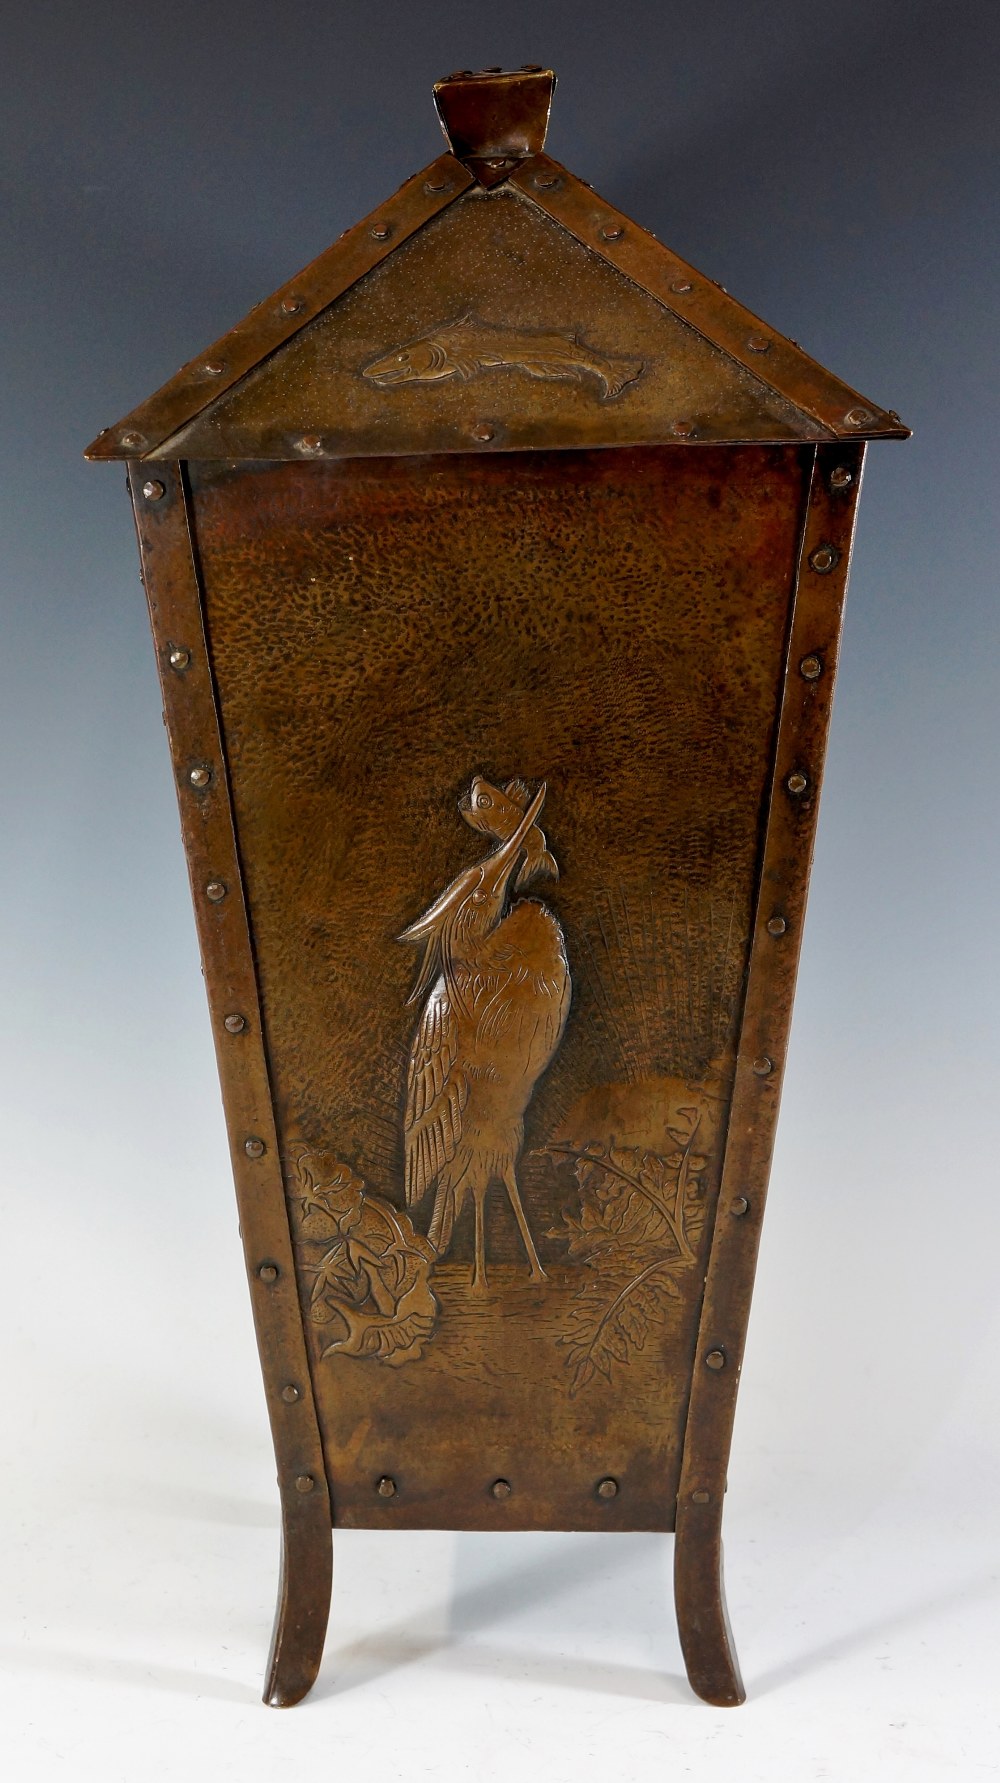 Newlyn School - a rare bronzed brass lidded casket the square cover formed as four triangular